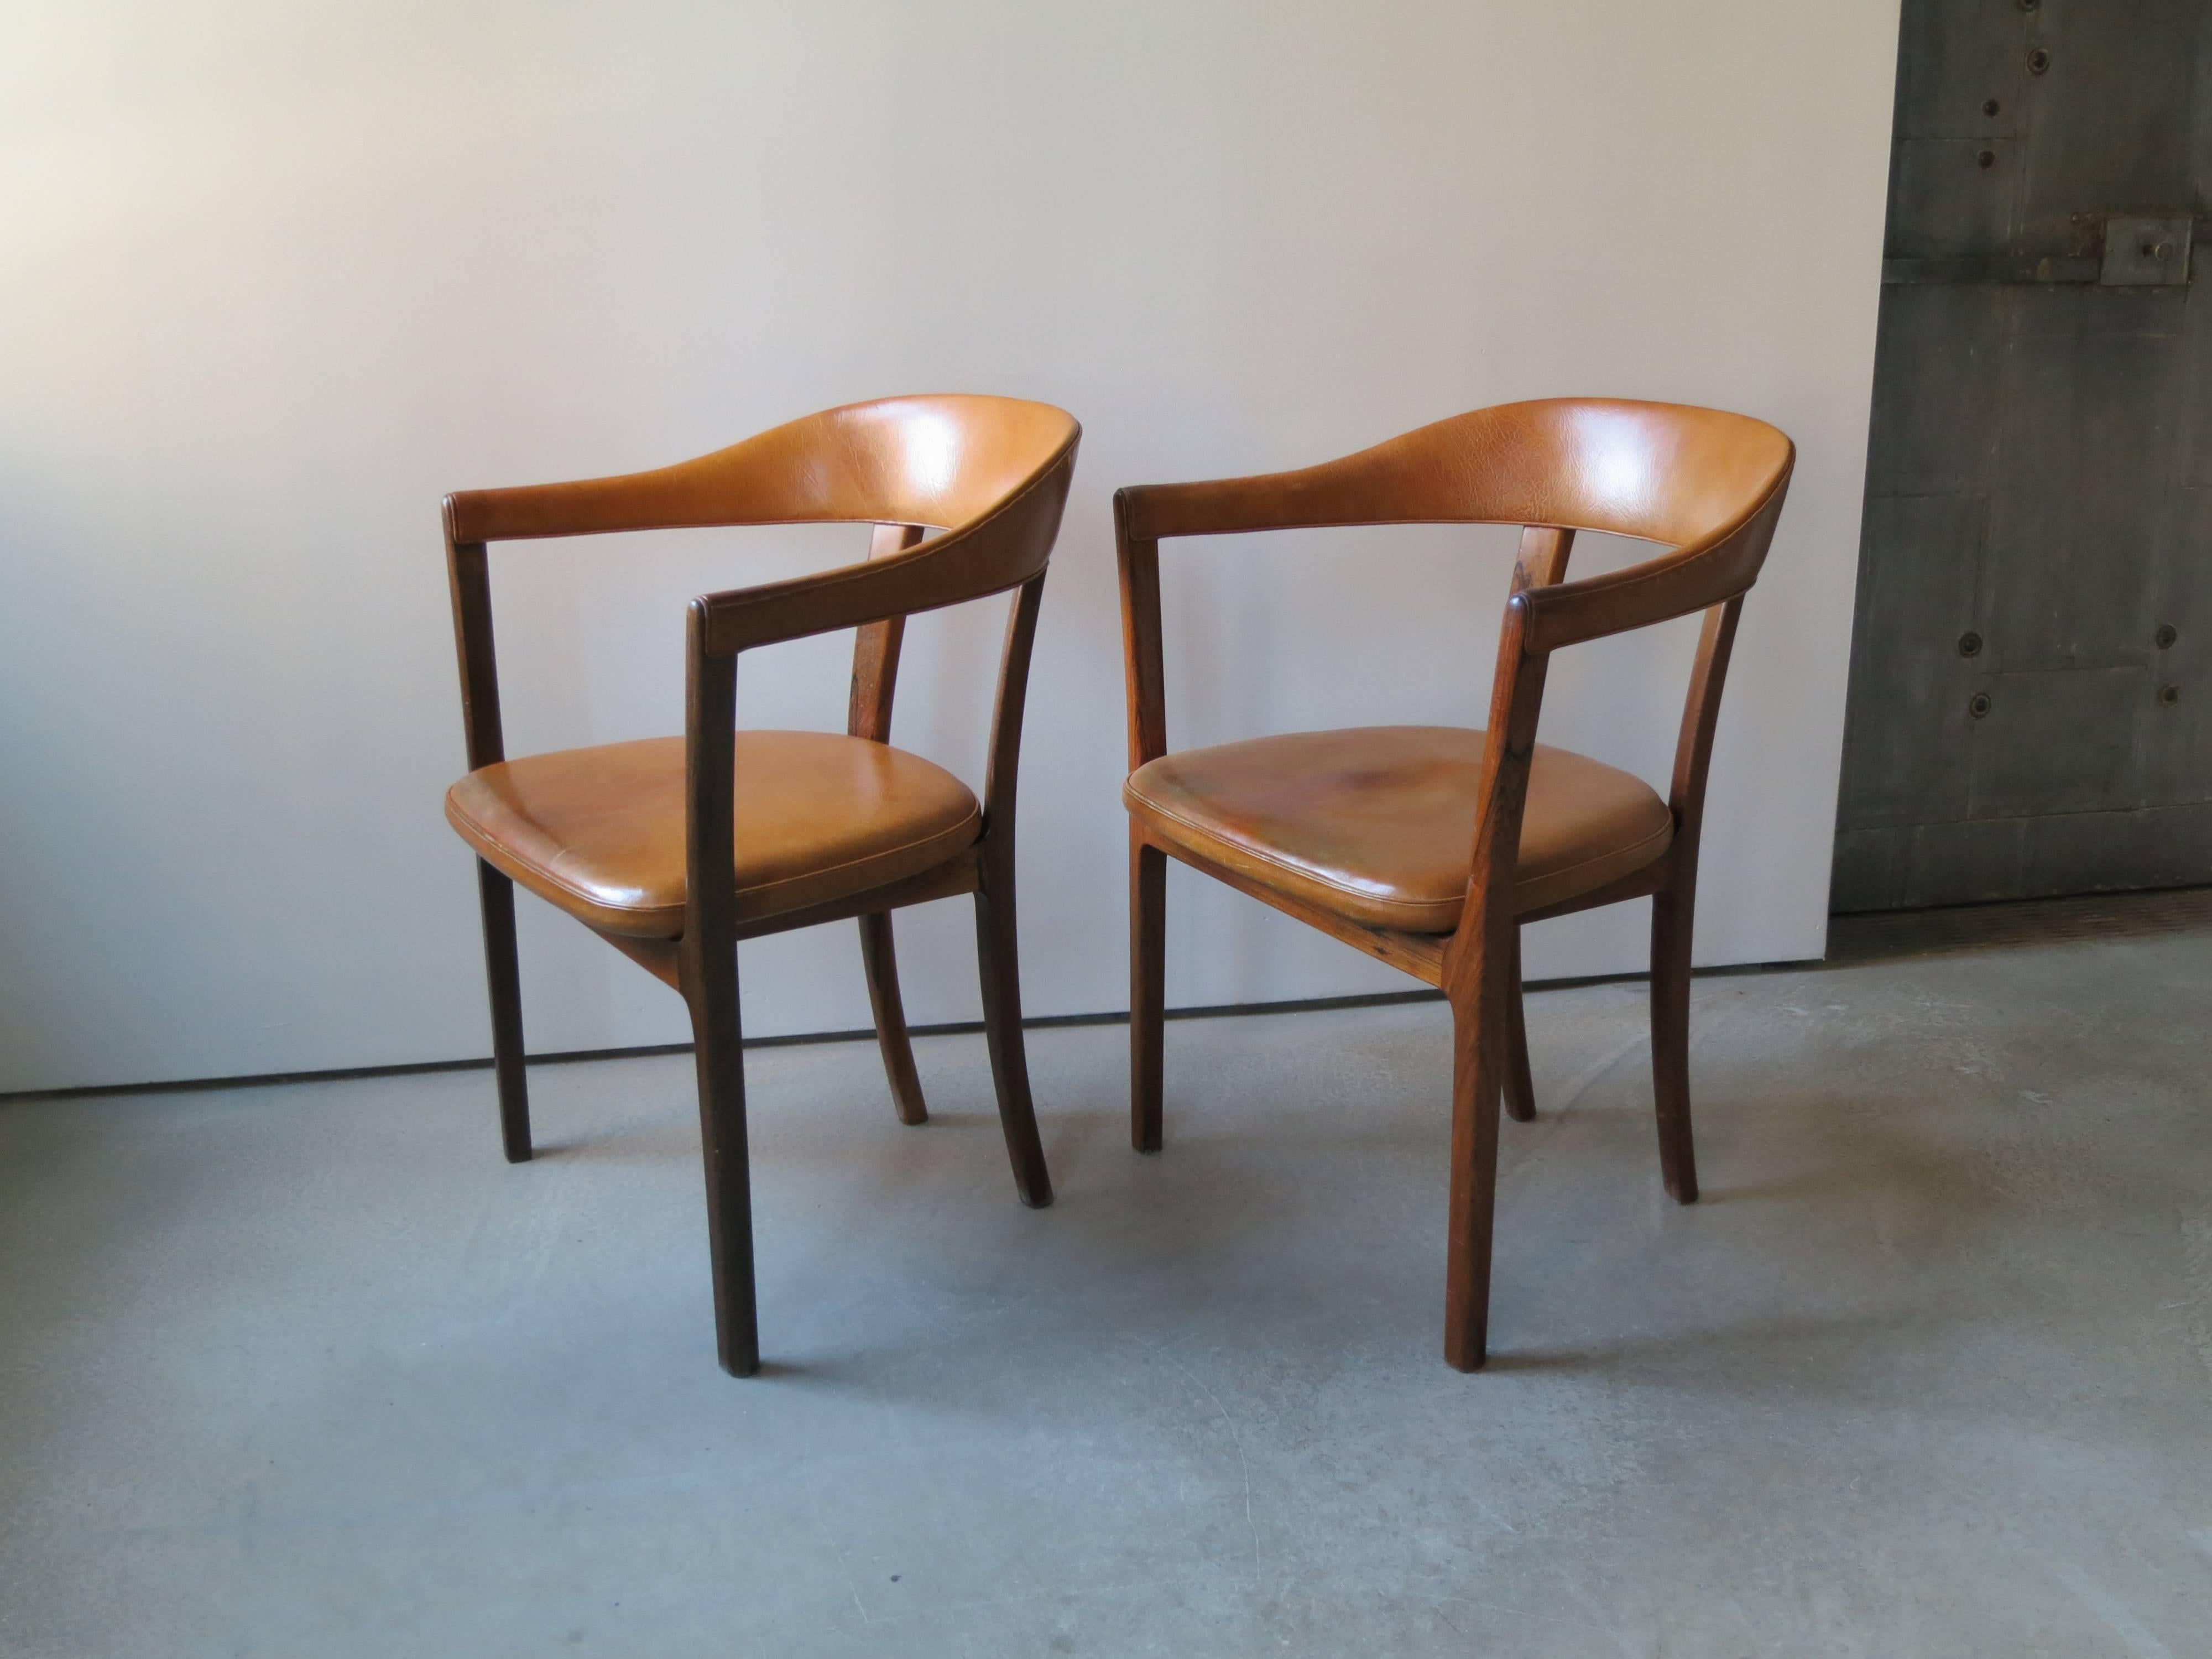 Ole Wanscher, Pair of Armchairs in Brazilian Rosewood and Nigerian Goatskin. There are three versions of this chair. Two of the versions have top rails of wood instead of leather upholstery. This version with leather upholstery provides an extremely